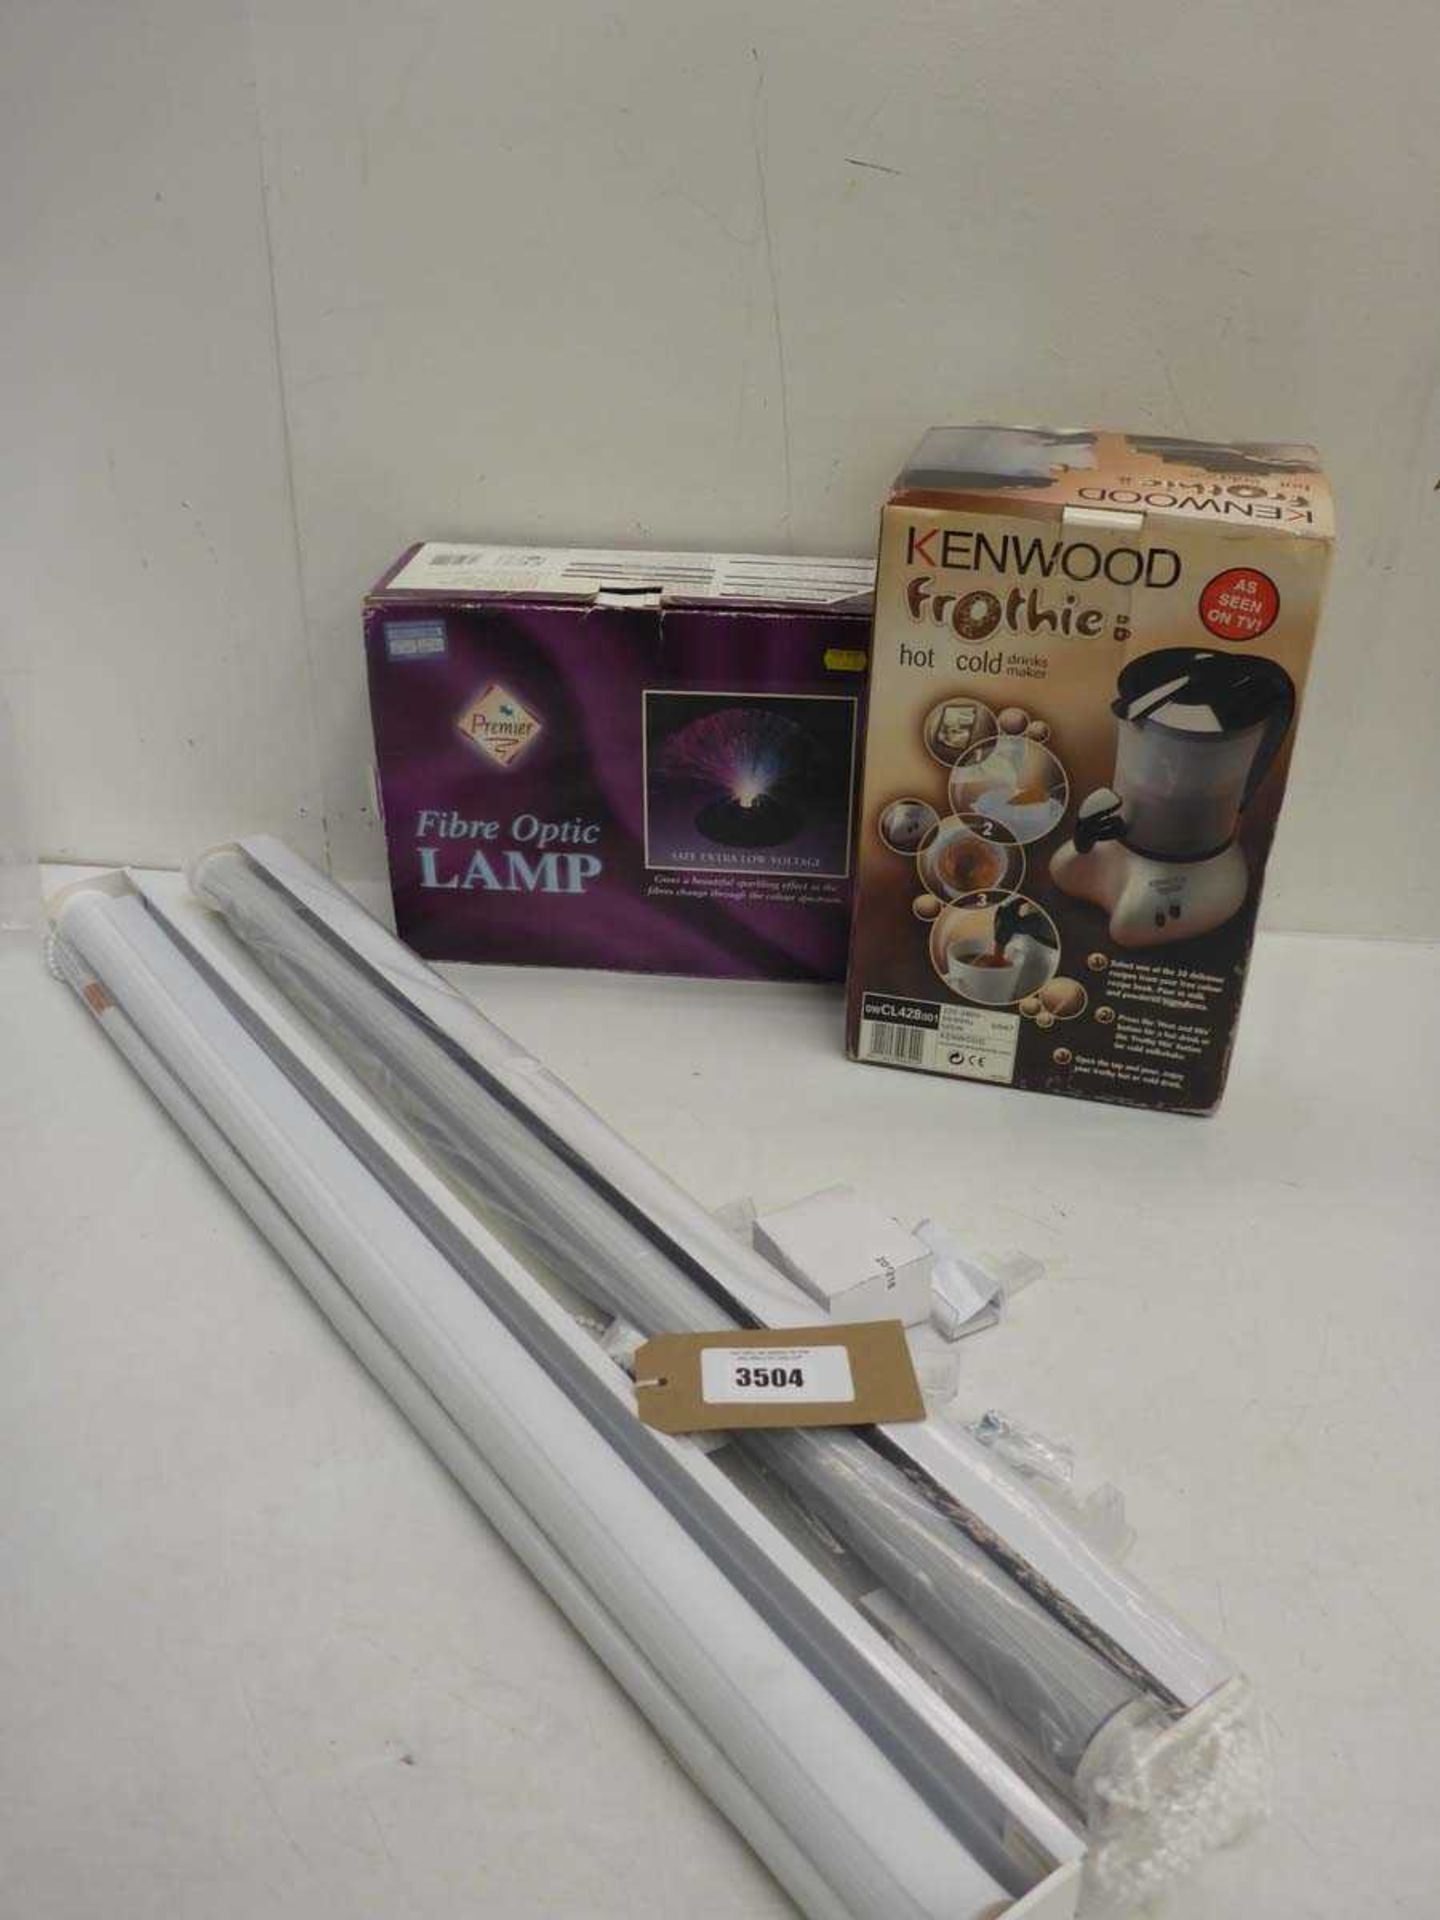 +VAT 2 x 90x160 blinds, Fibre Optic lamp and Kenwood Frothie